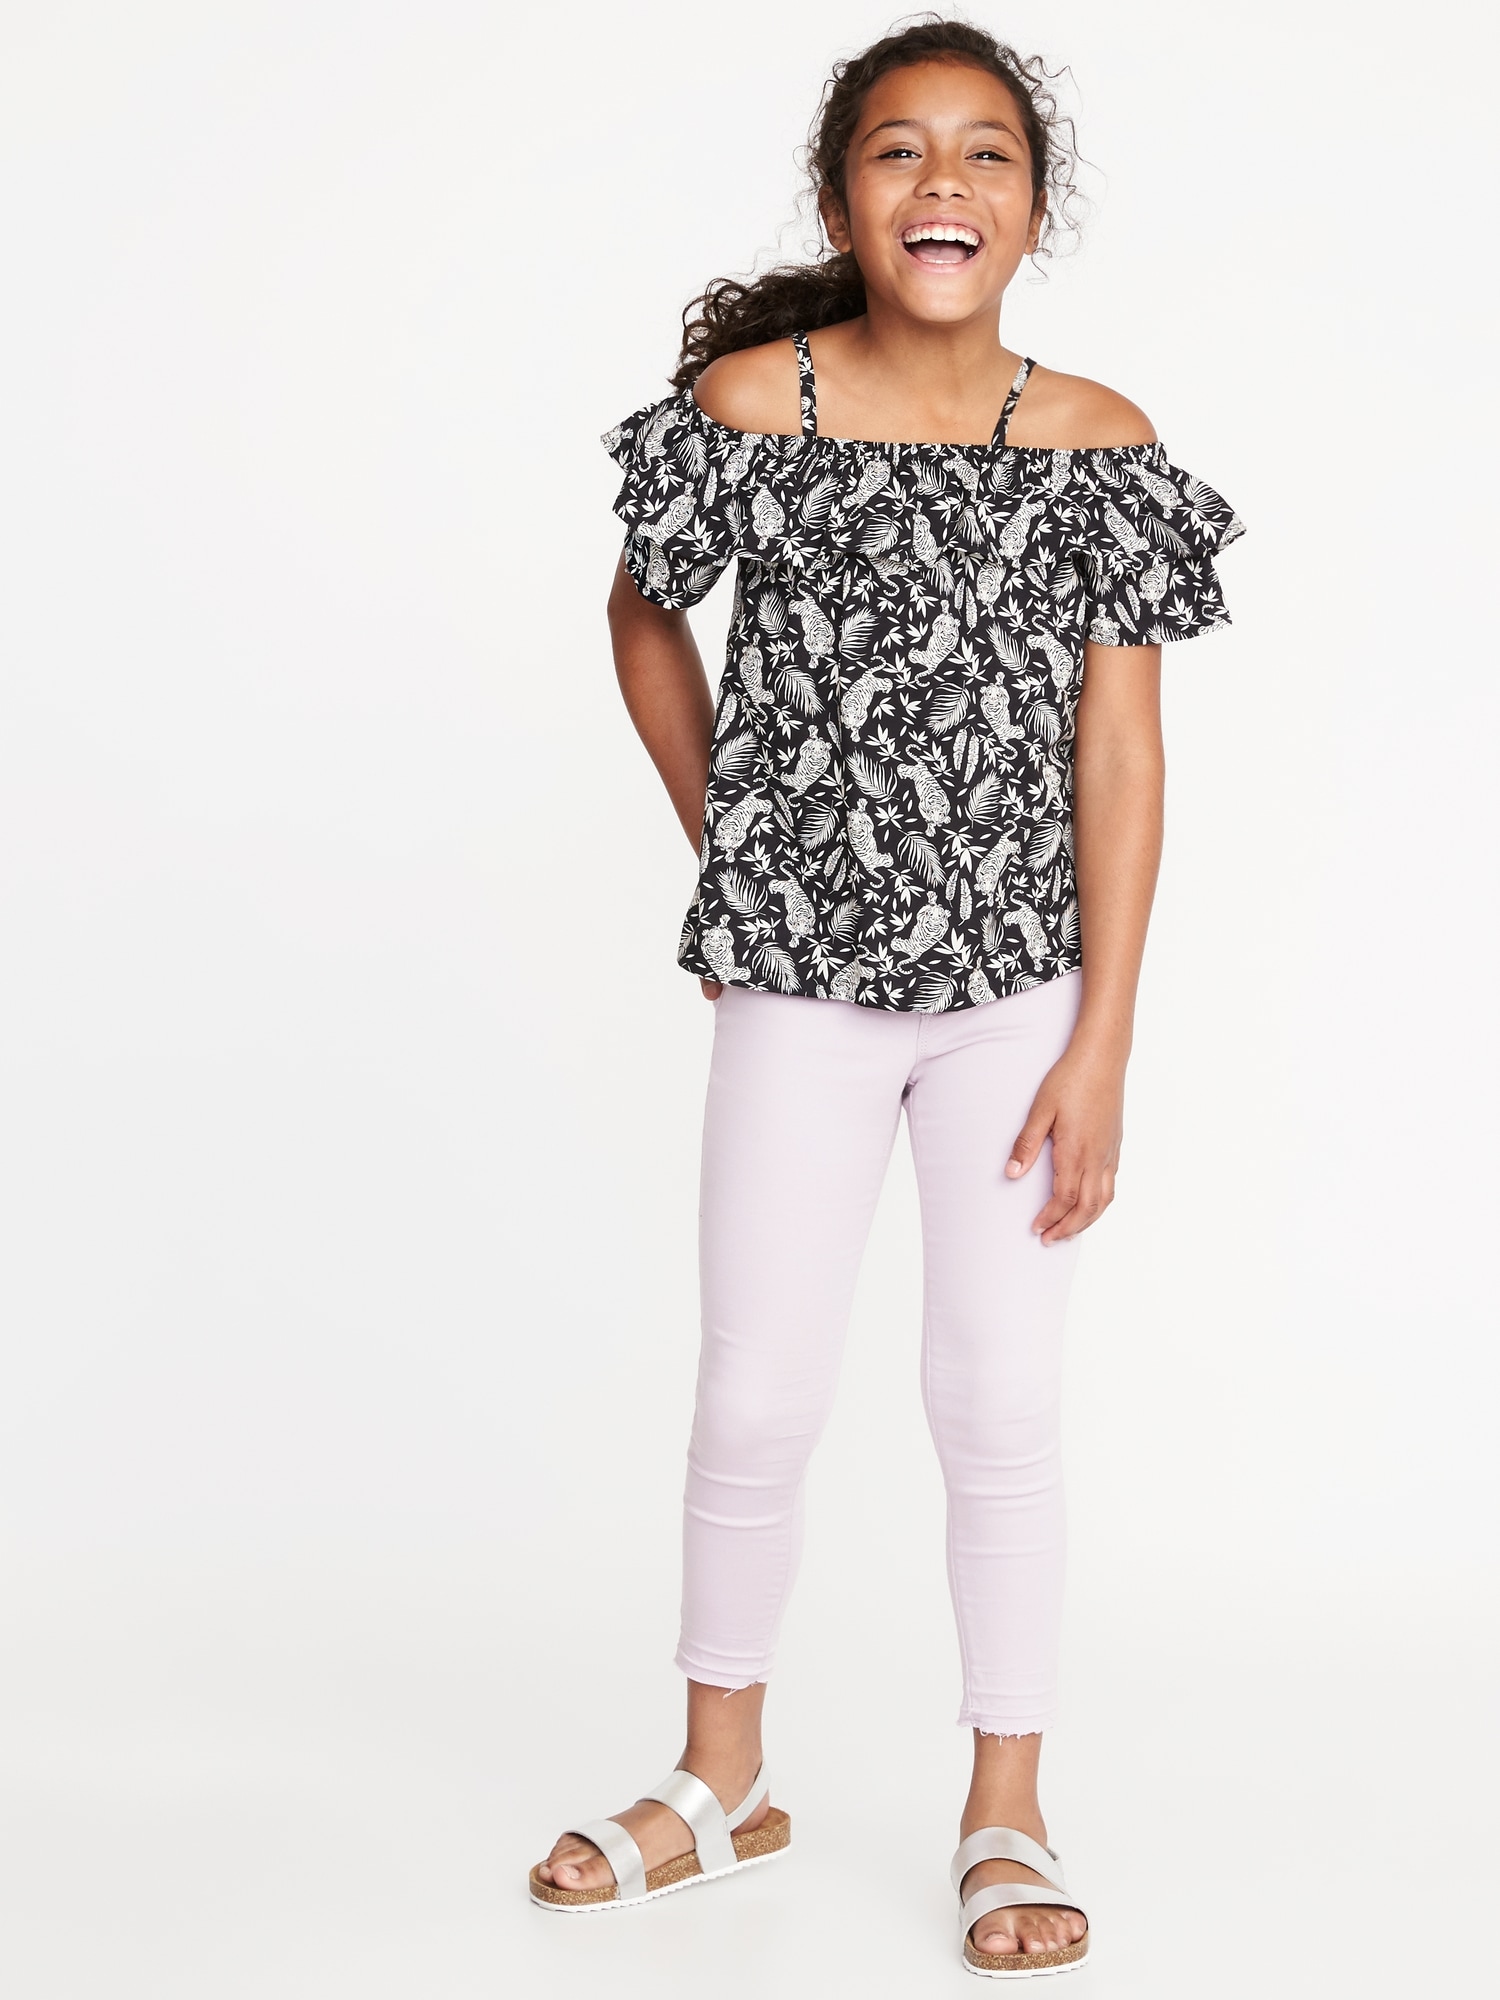 Ruffled Off-the-Shoulder Top for Girls | Old Navy